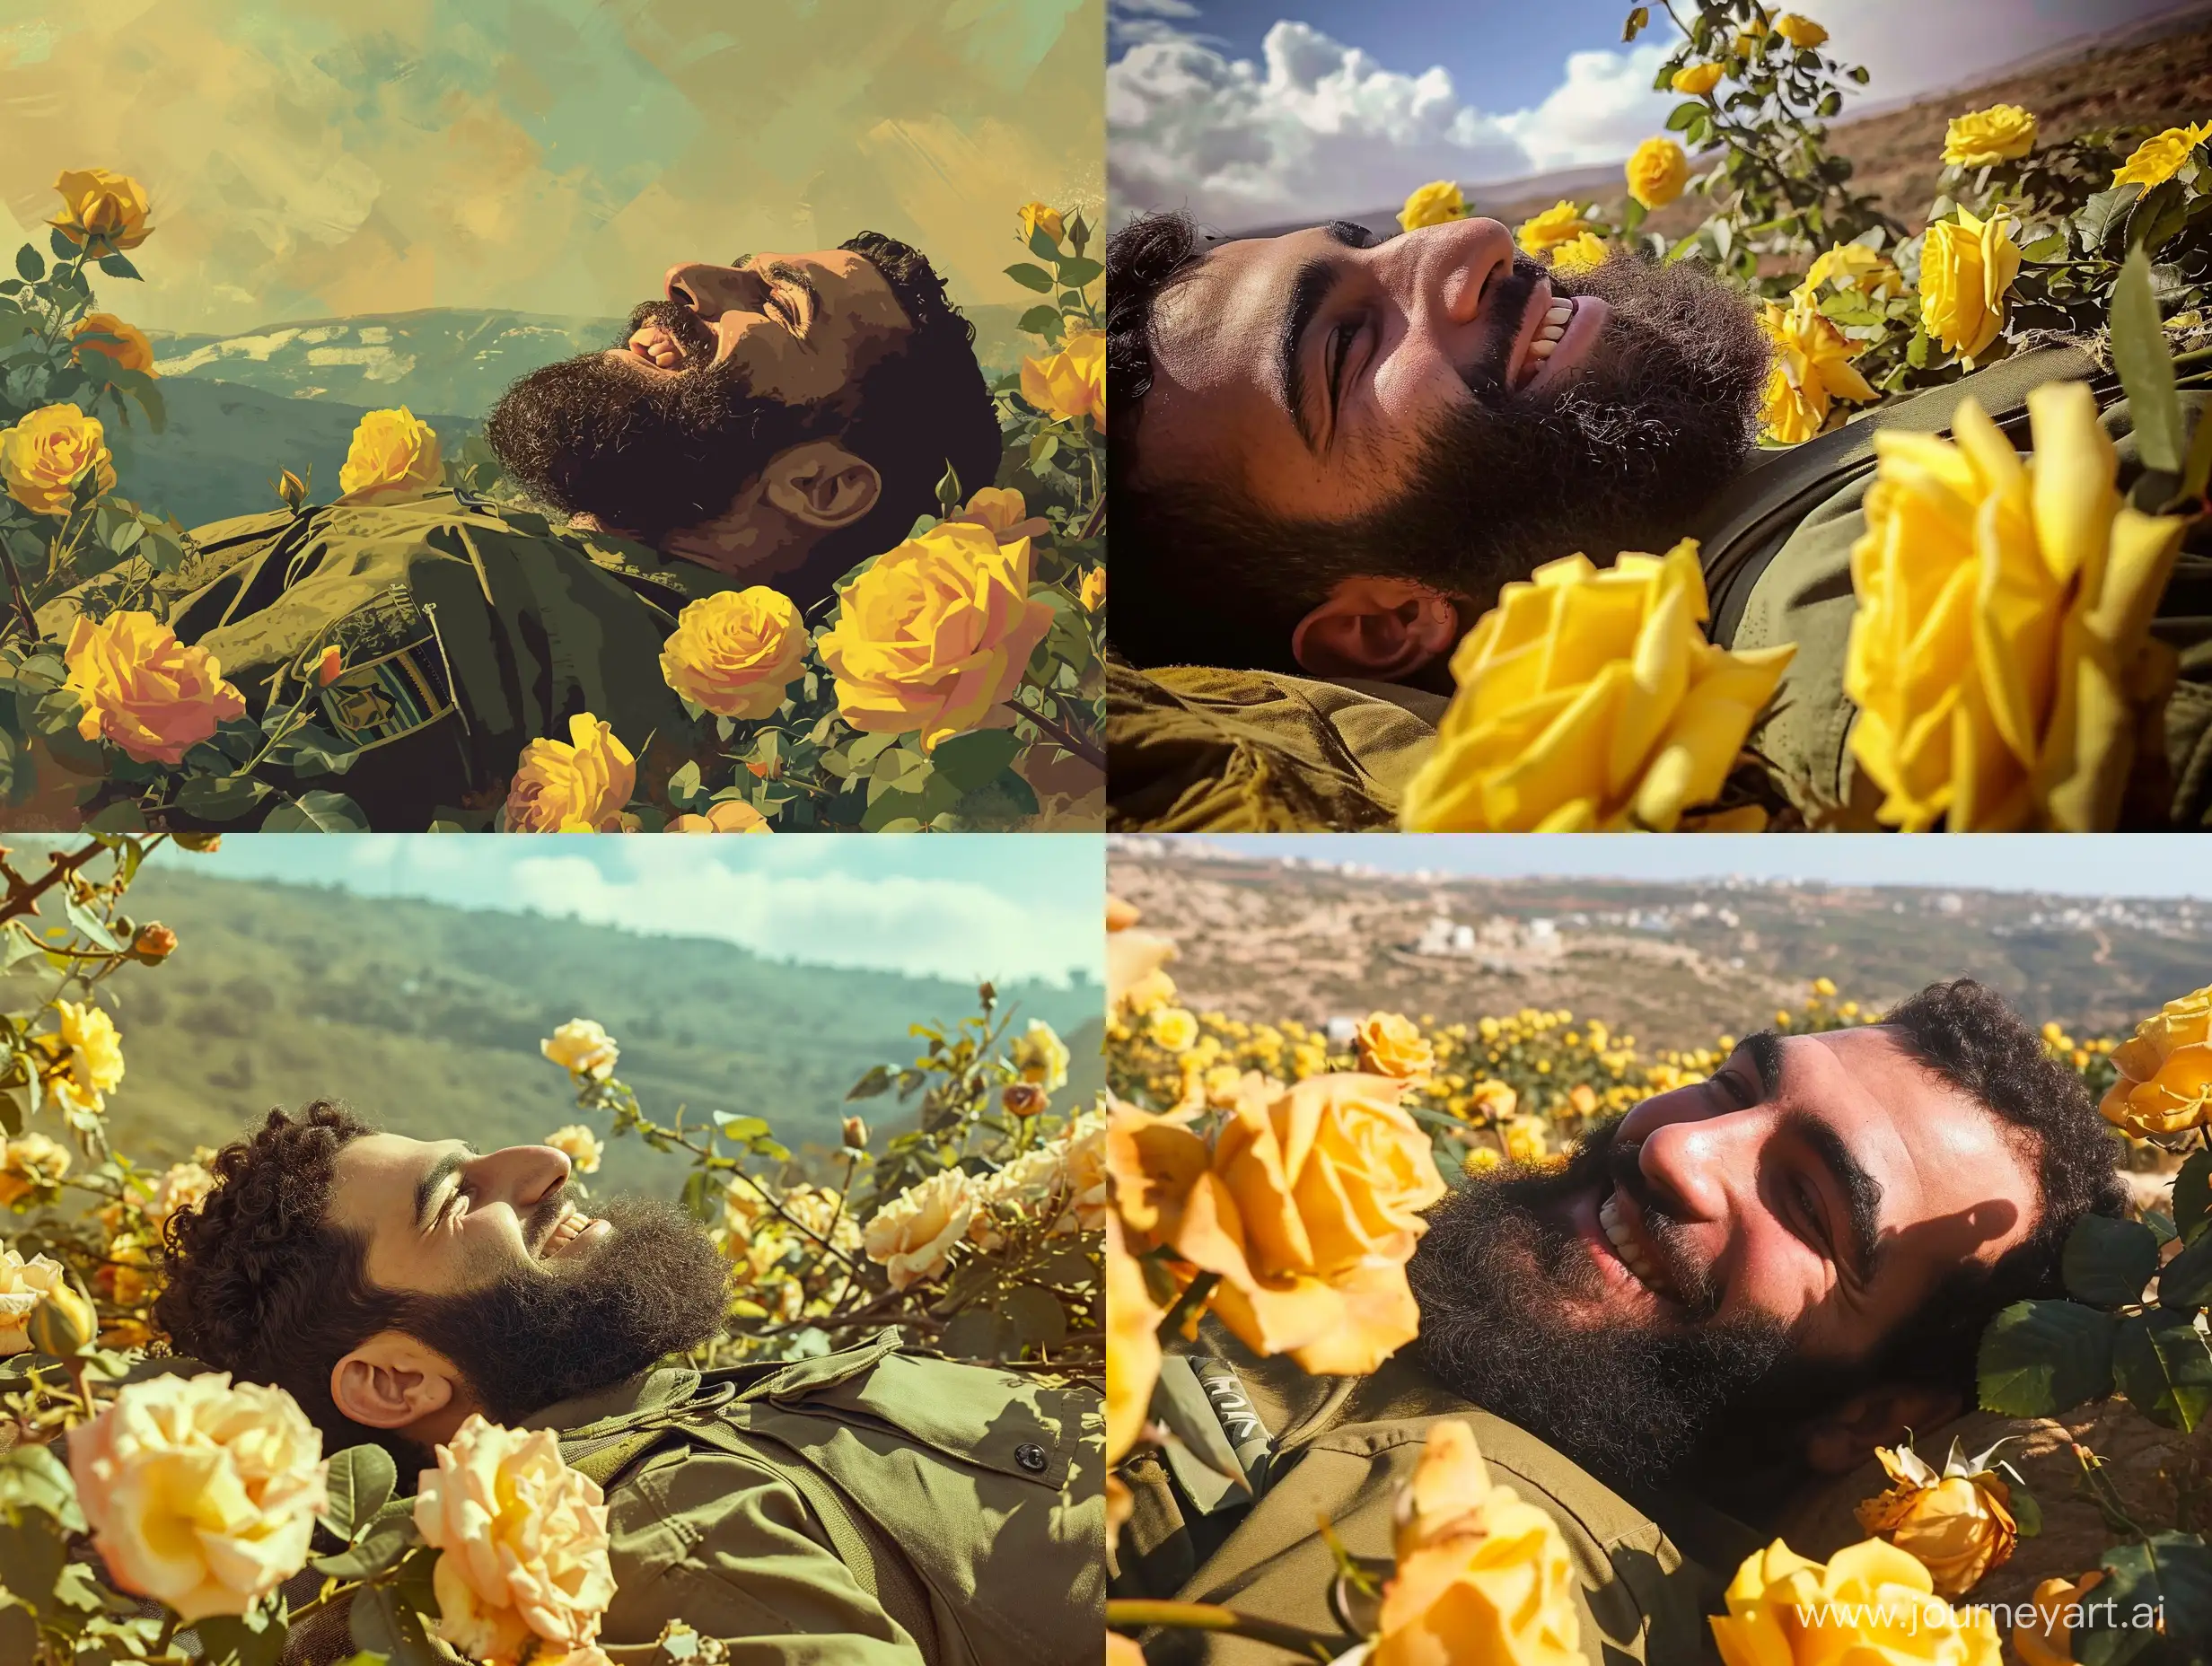 Joyful-Hezbollah-Soldier-Surrounded-by-Yellow-Roses-in-Landscape